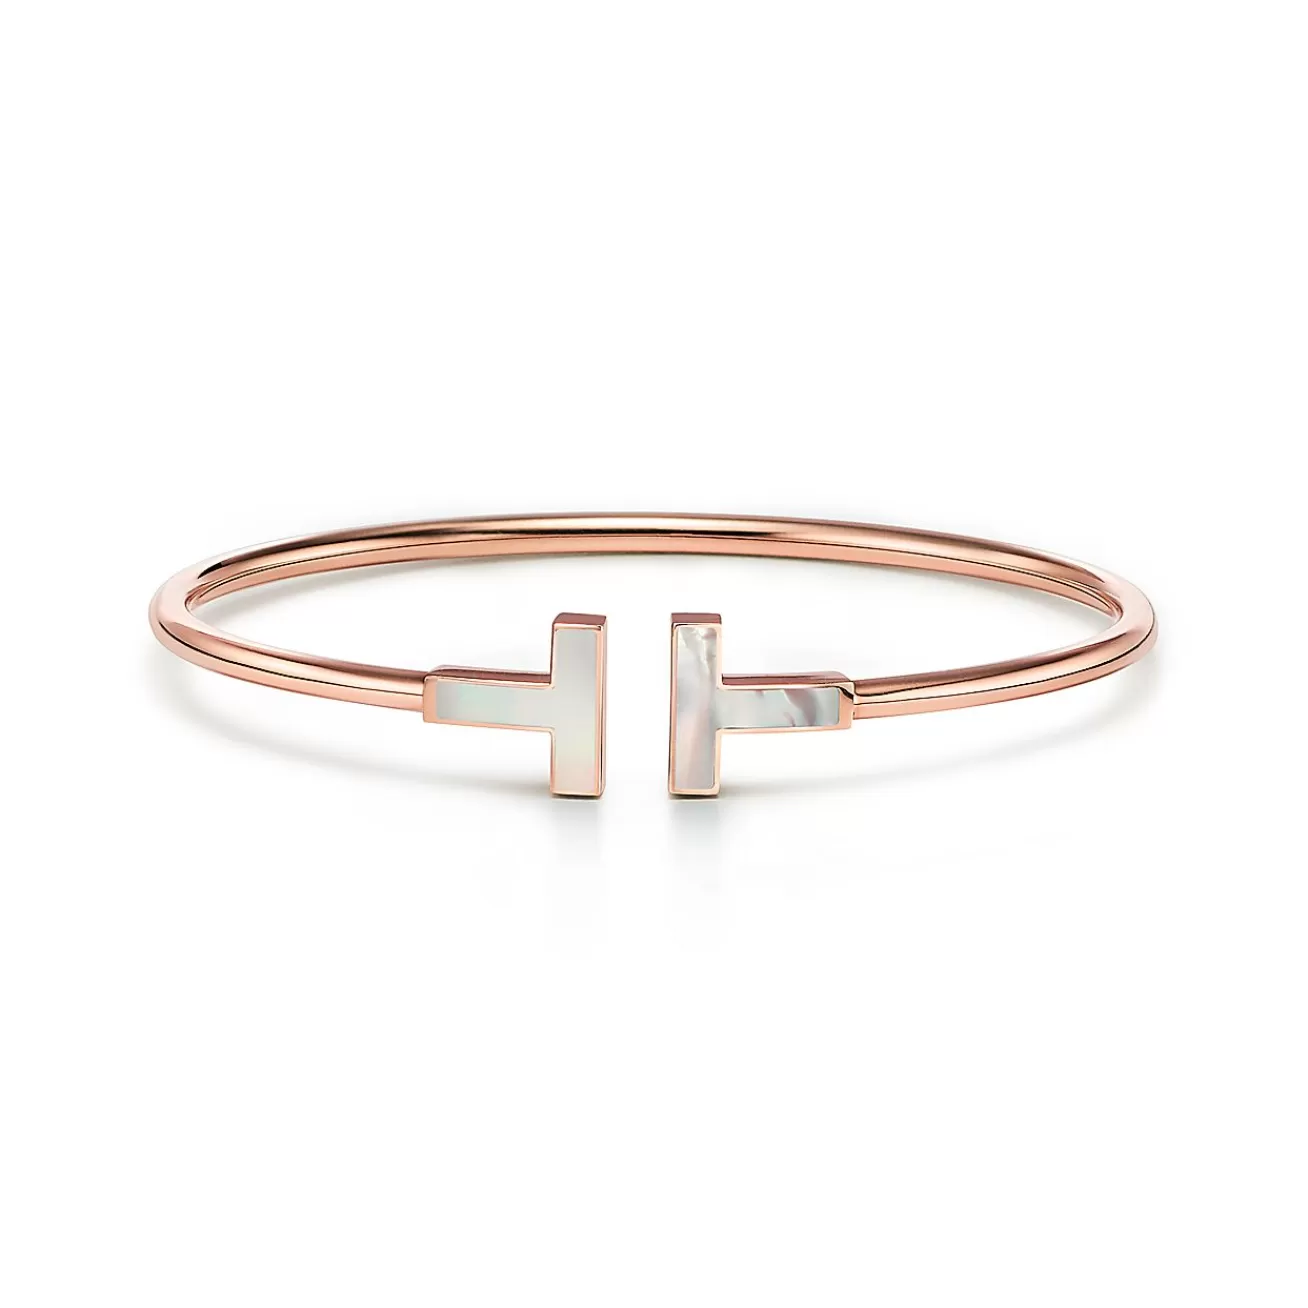 Tiffany & Co. Tiffany T Wire Bracelet in Rose Gold with Mother-of-pearl | ^ Bracelets | Gifts for Her